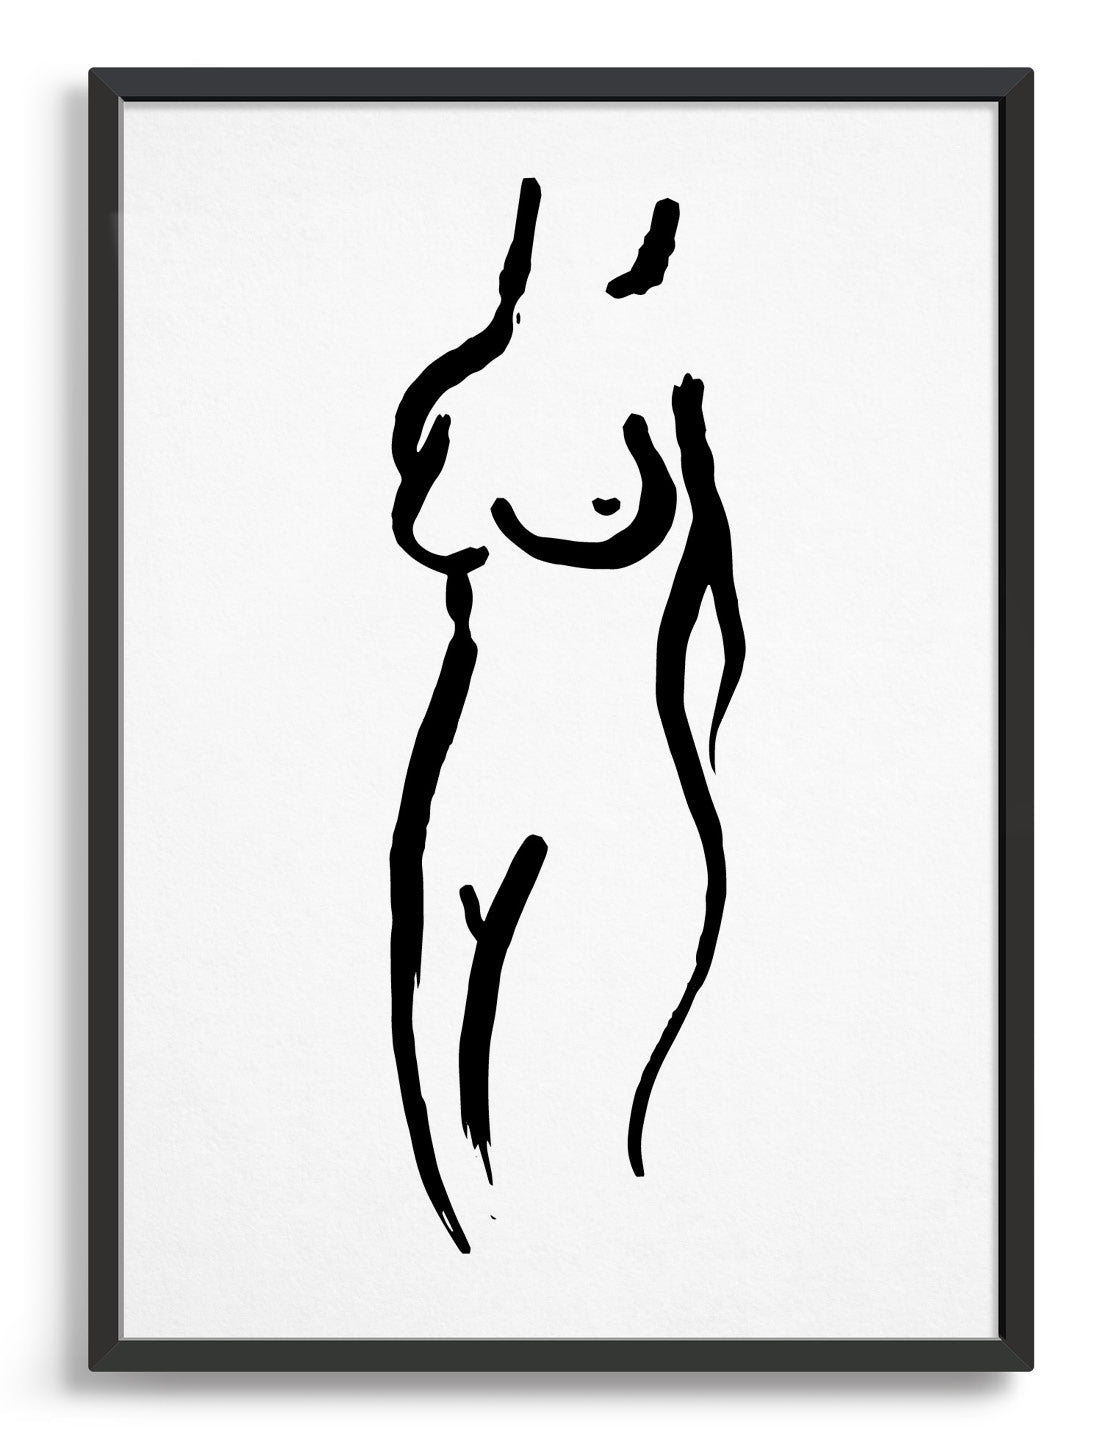 hand drawn black line drawing of a female torso, neck and upper legs against a white background